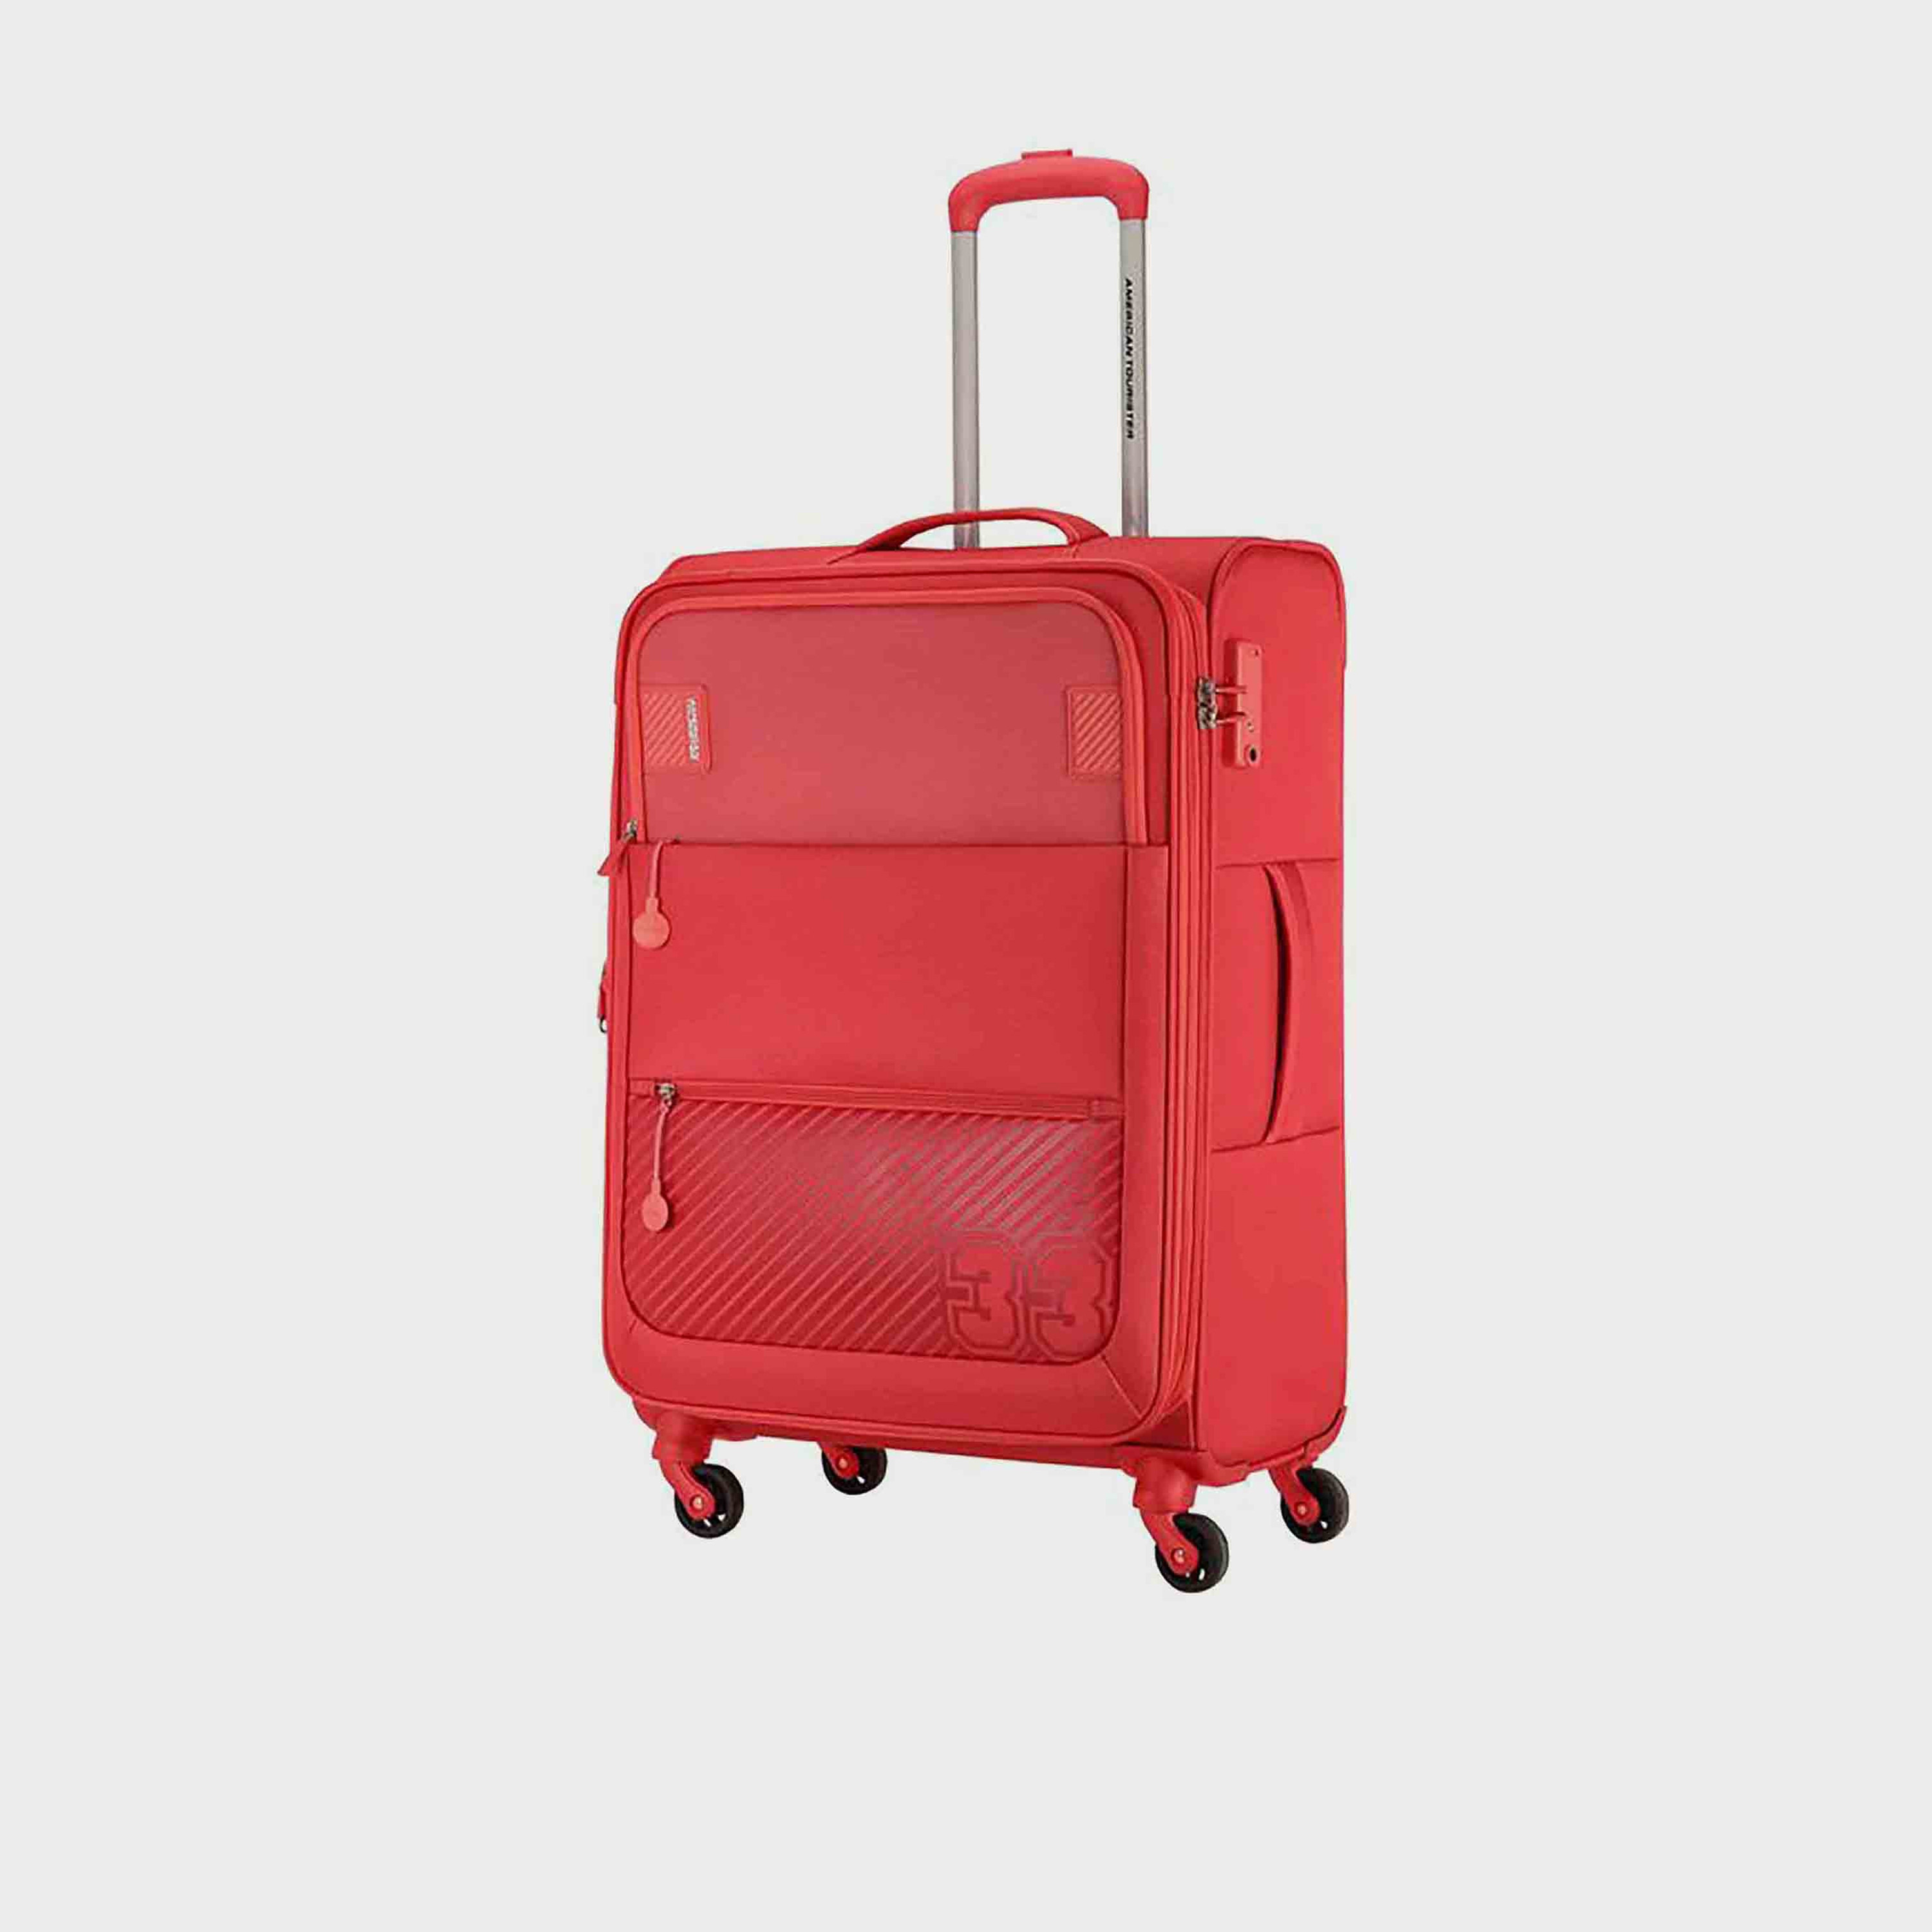 American Tourister AT POP MAX 3 Piece Set (21